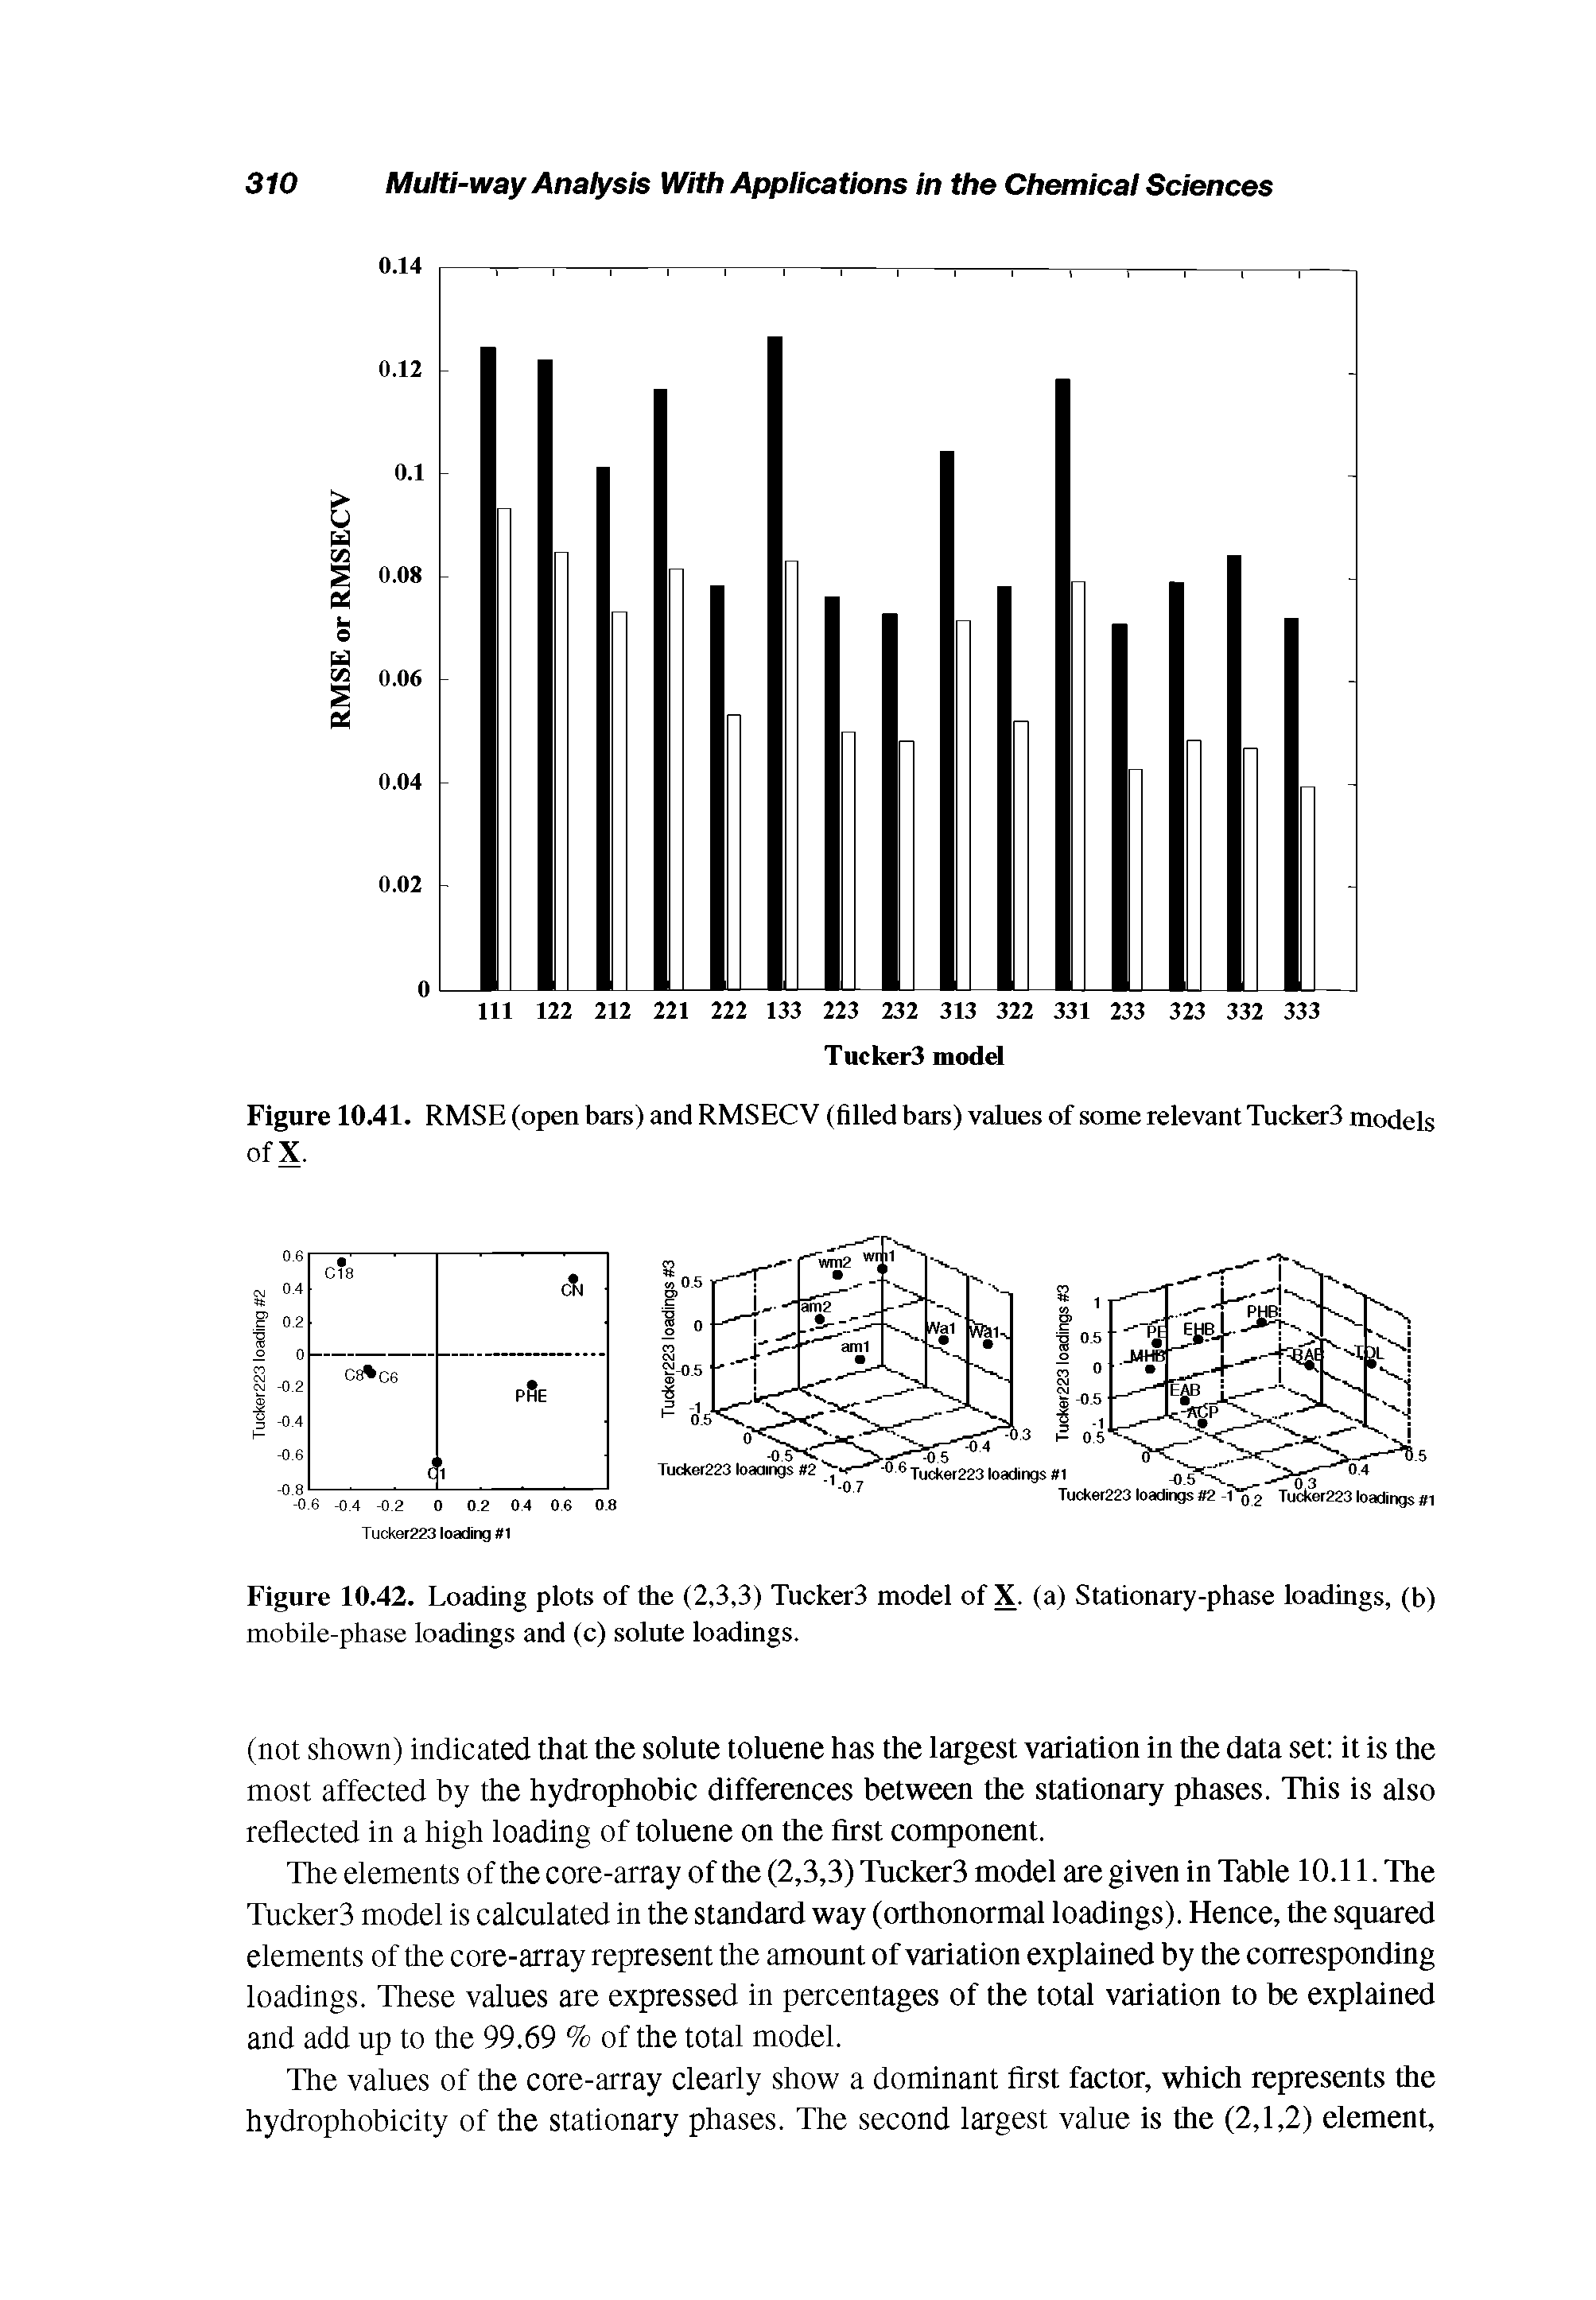 Figure 10.42. Loading plots of the (2,3,3) Tucker3 model of X. (a) Stationary-phase loadings, (b) mobile-phase loadings and (c) solute loadings.